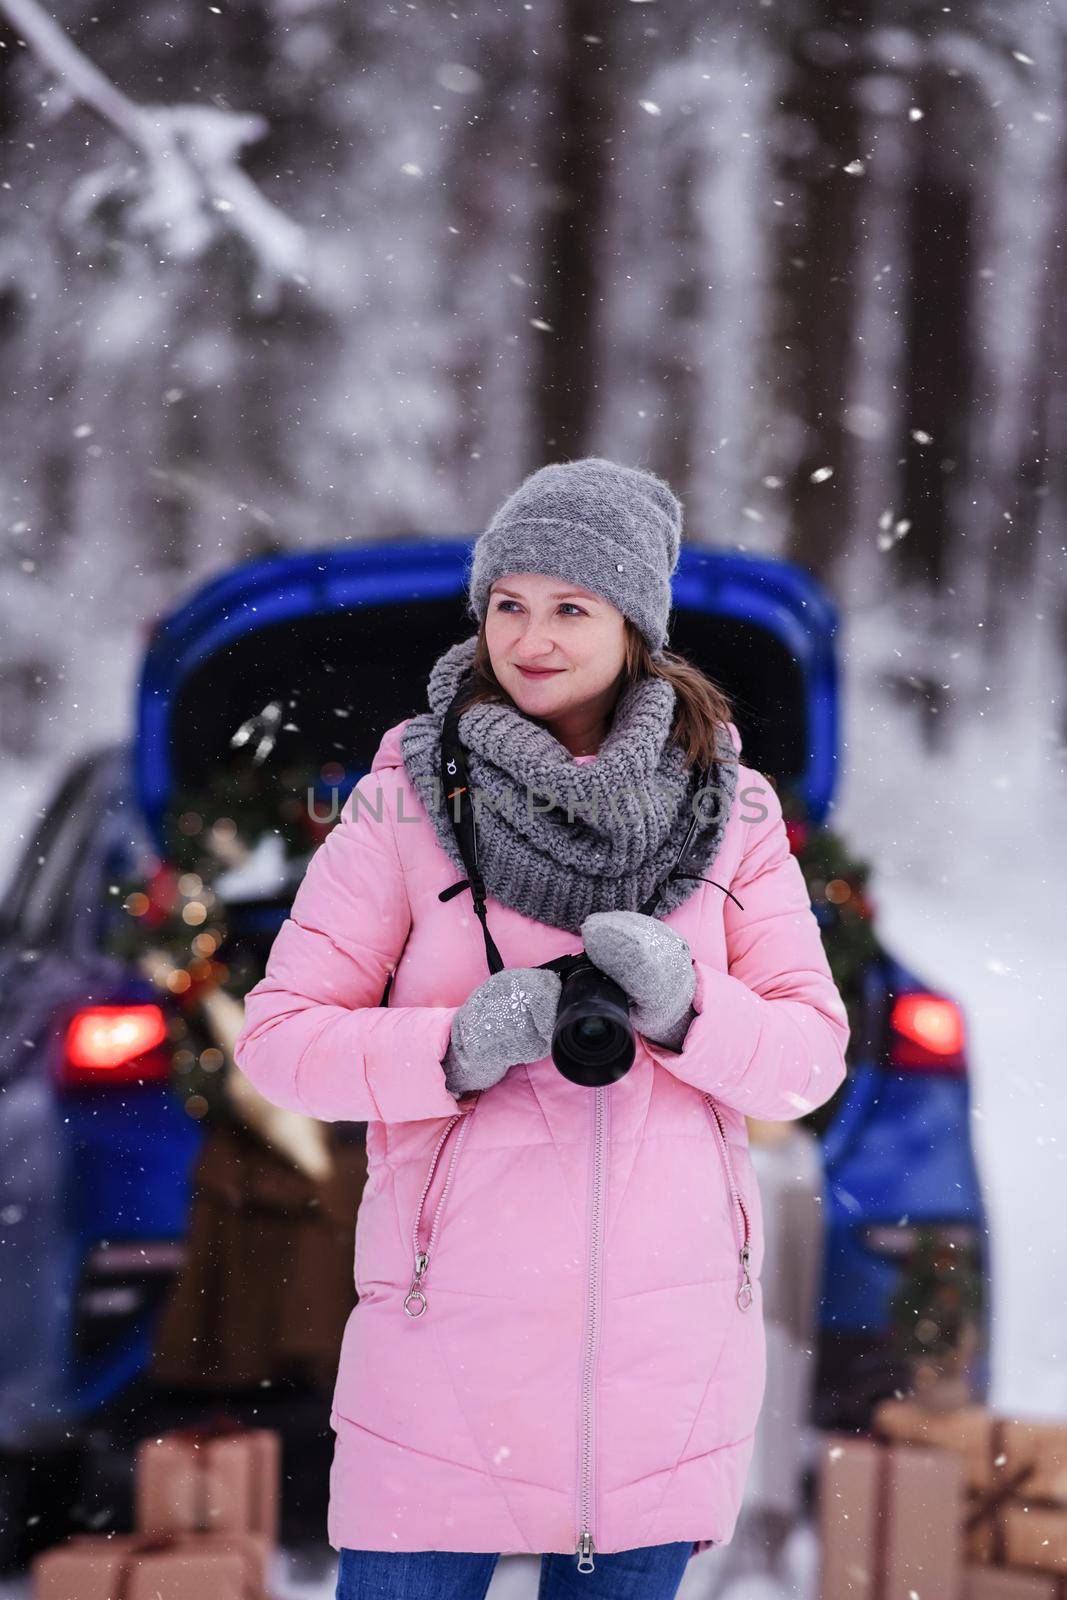 A woman in a winter snow-covered forest in the trunk of a car decorated with Christmas decor. by Annu1tochka